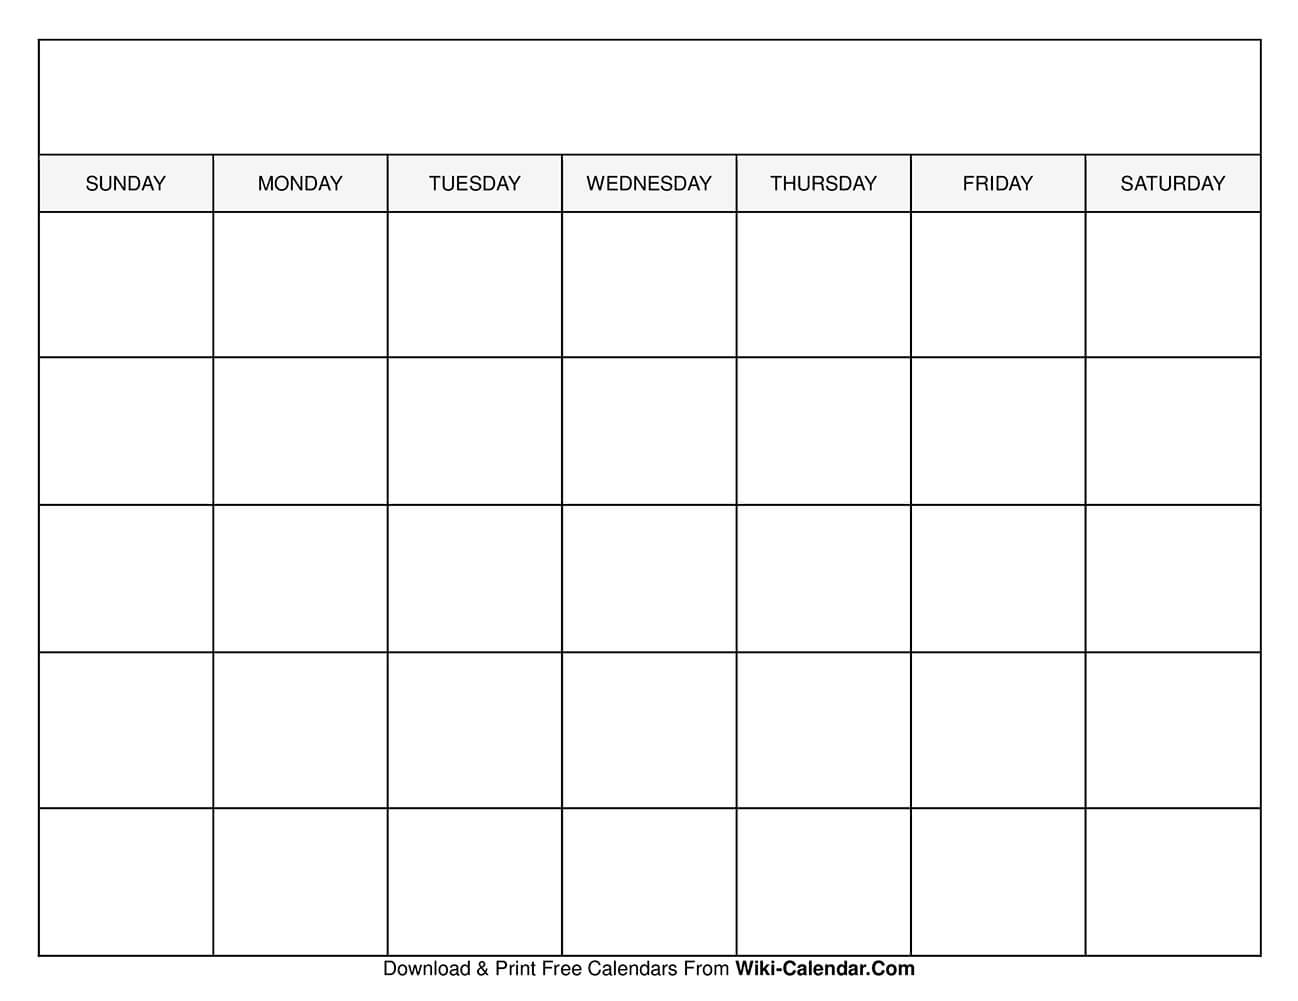 Pick Free Printable Calendar Without Download